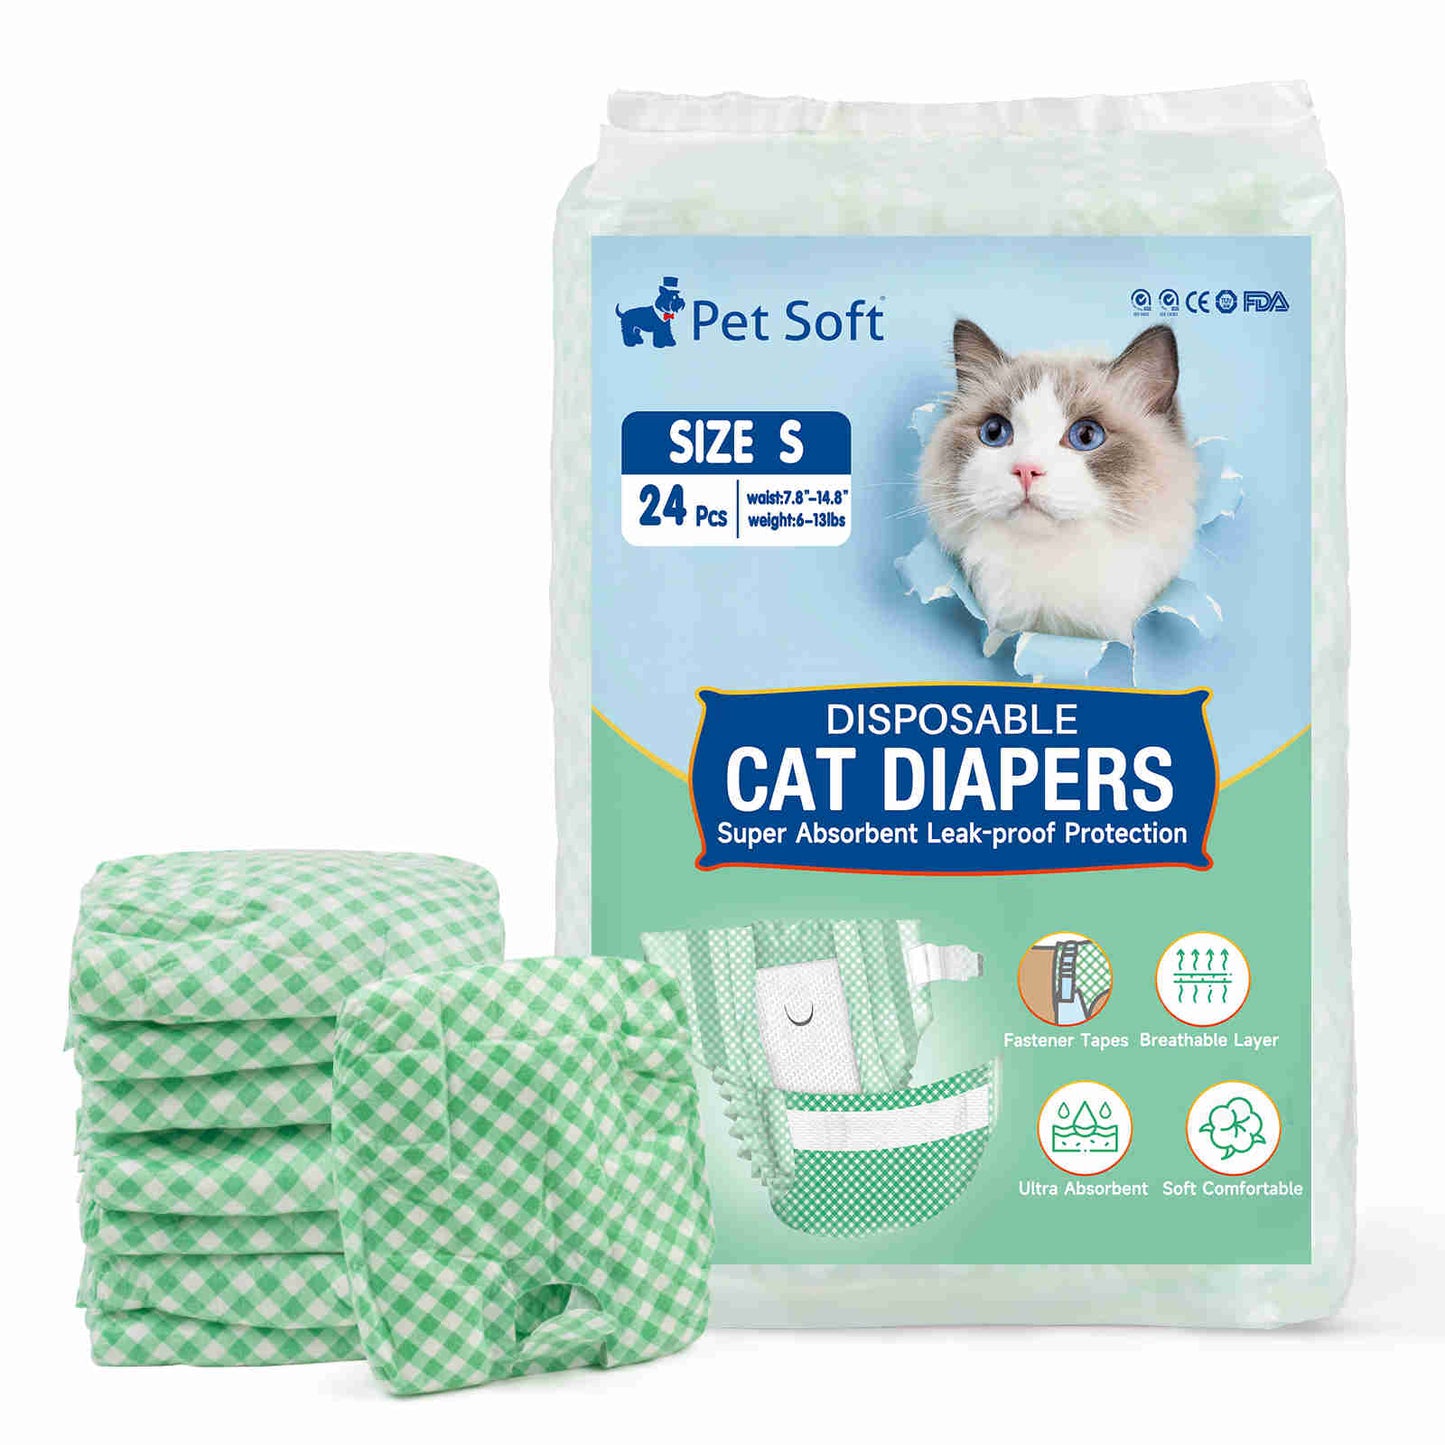 Disposable Cat Diapers, Green Plaid Pattern, 24 Pcs, 1 Pack